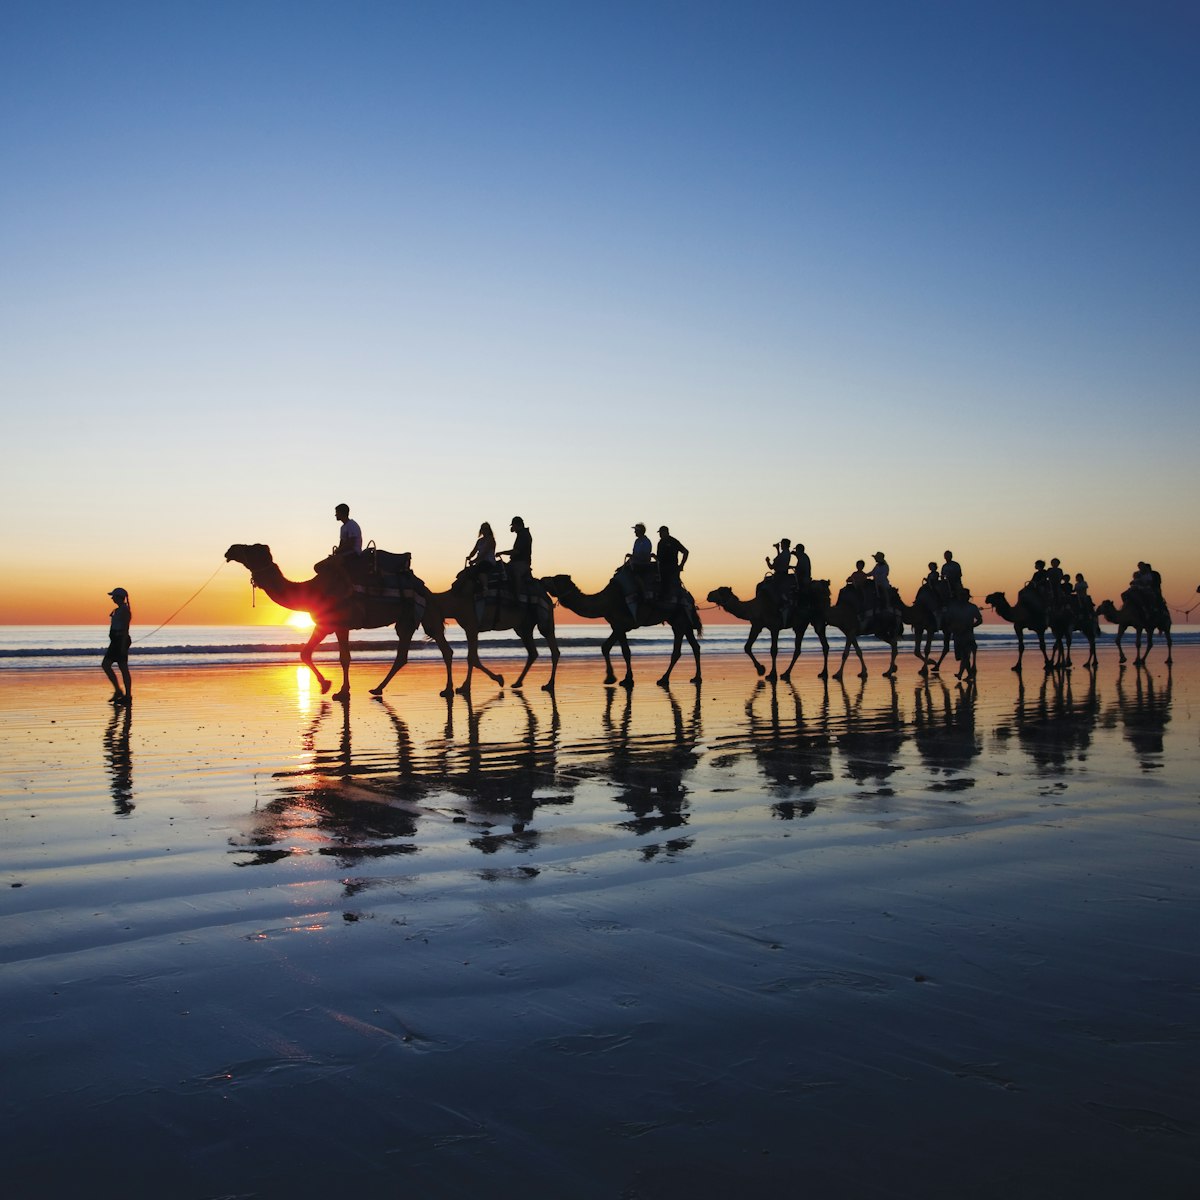 Camels walking on Cable Beach, Broome, Western Australia during sunset